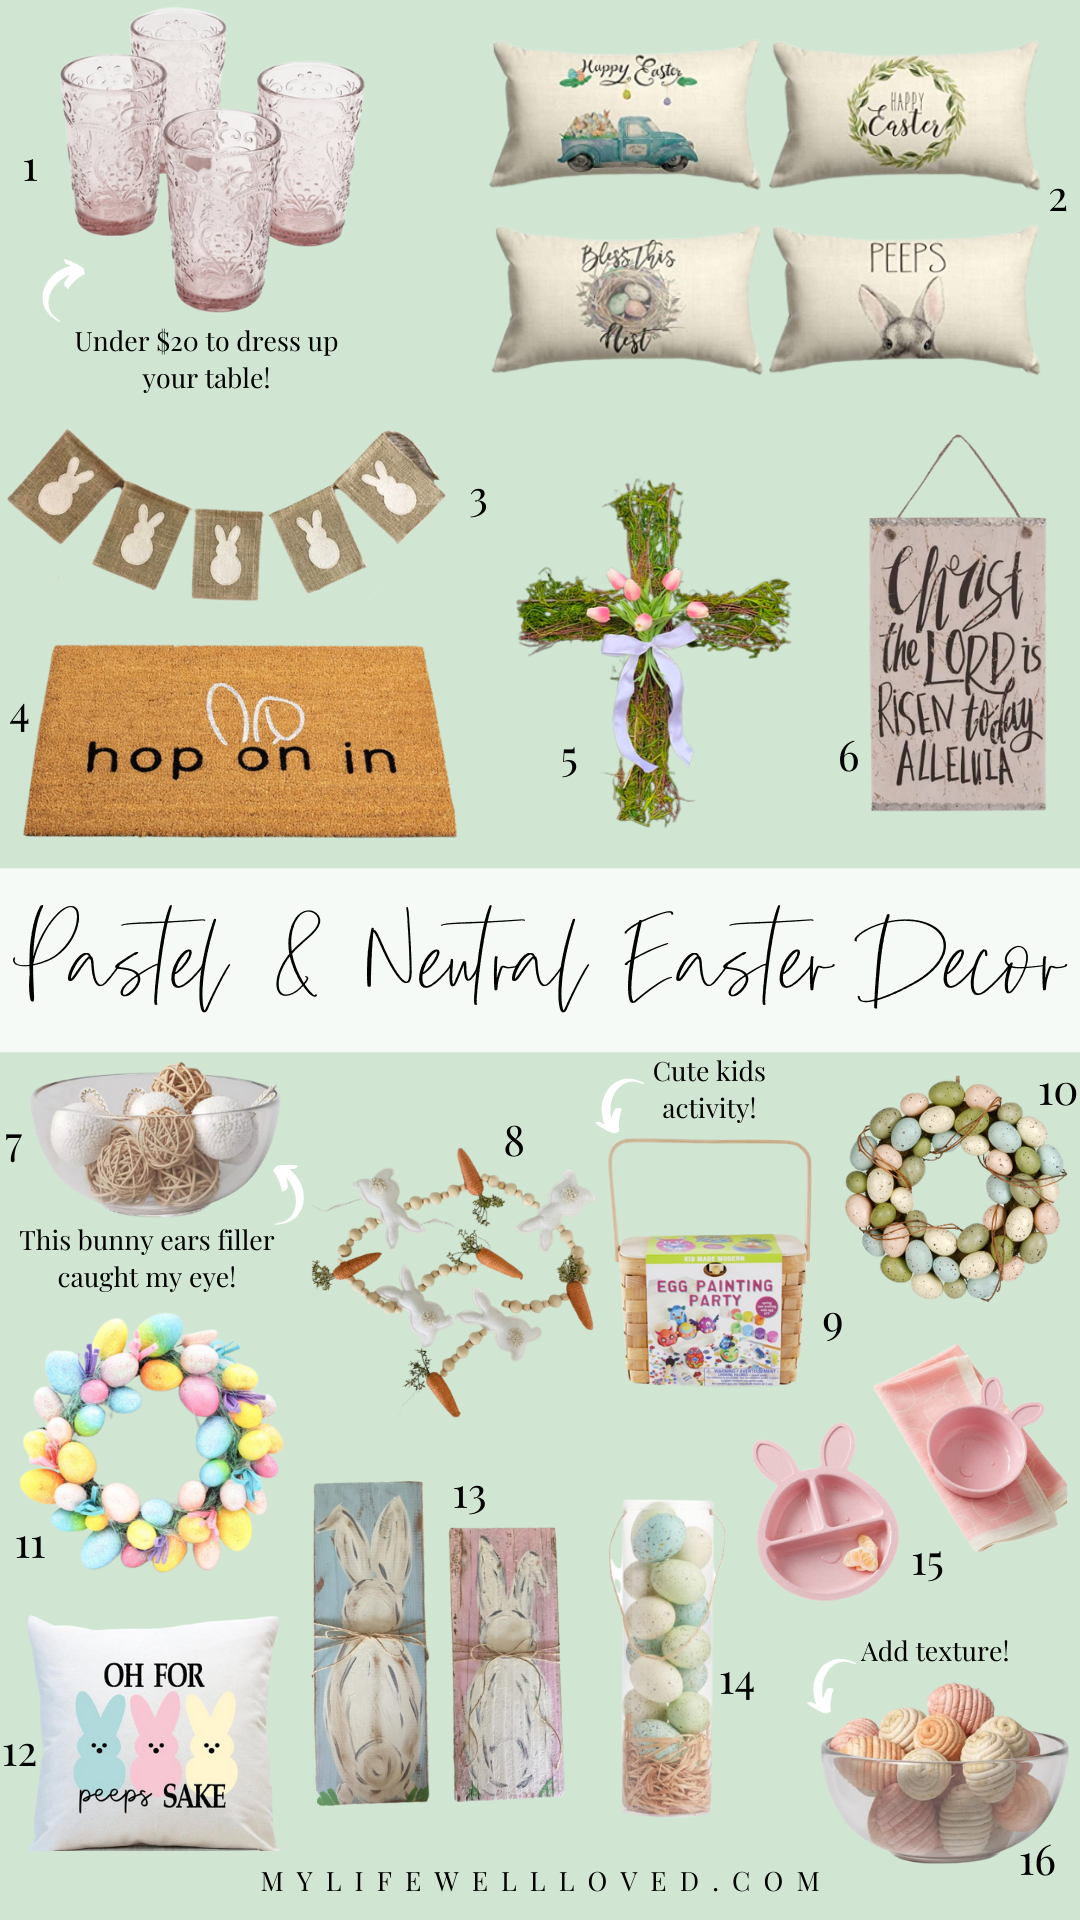 Fun Easter Basket Gift Ideas For Boys And Girls by Alabama Faith + Family blogger, My Life Well Loved // Heather Brown